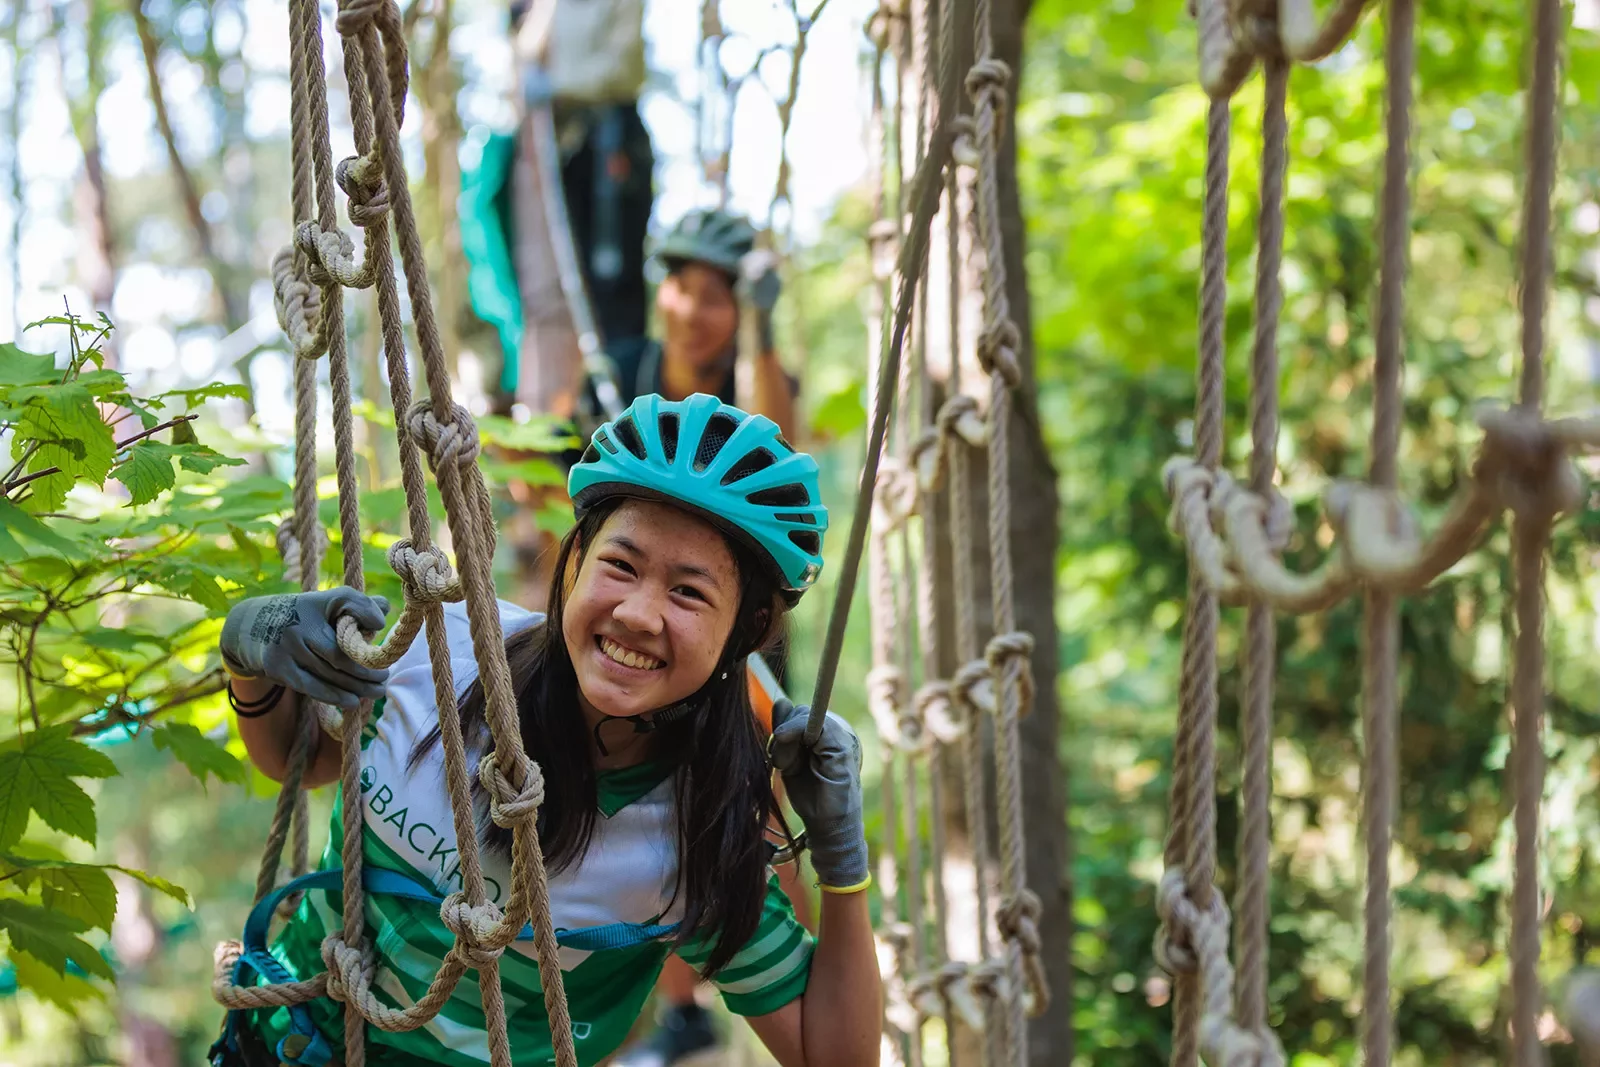 Young guest doing ropes course, smiling at camera.